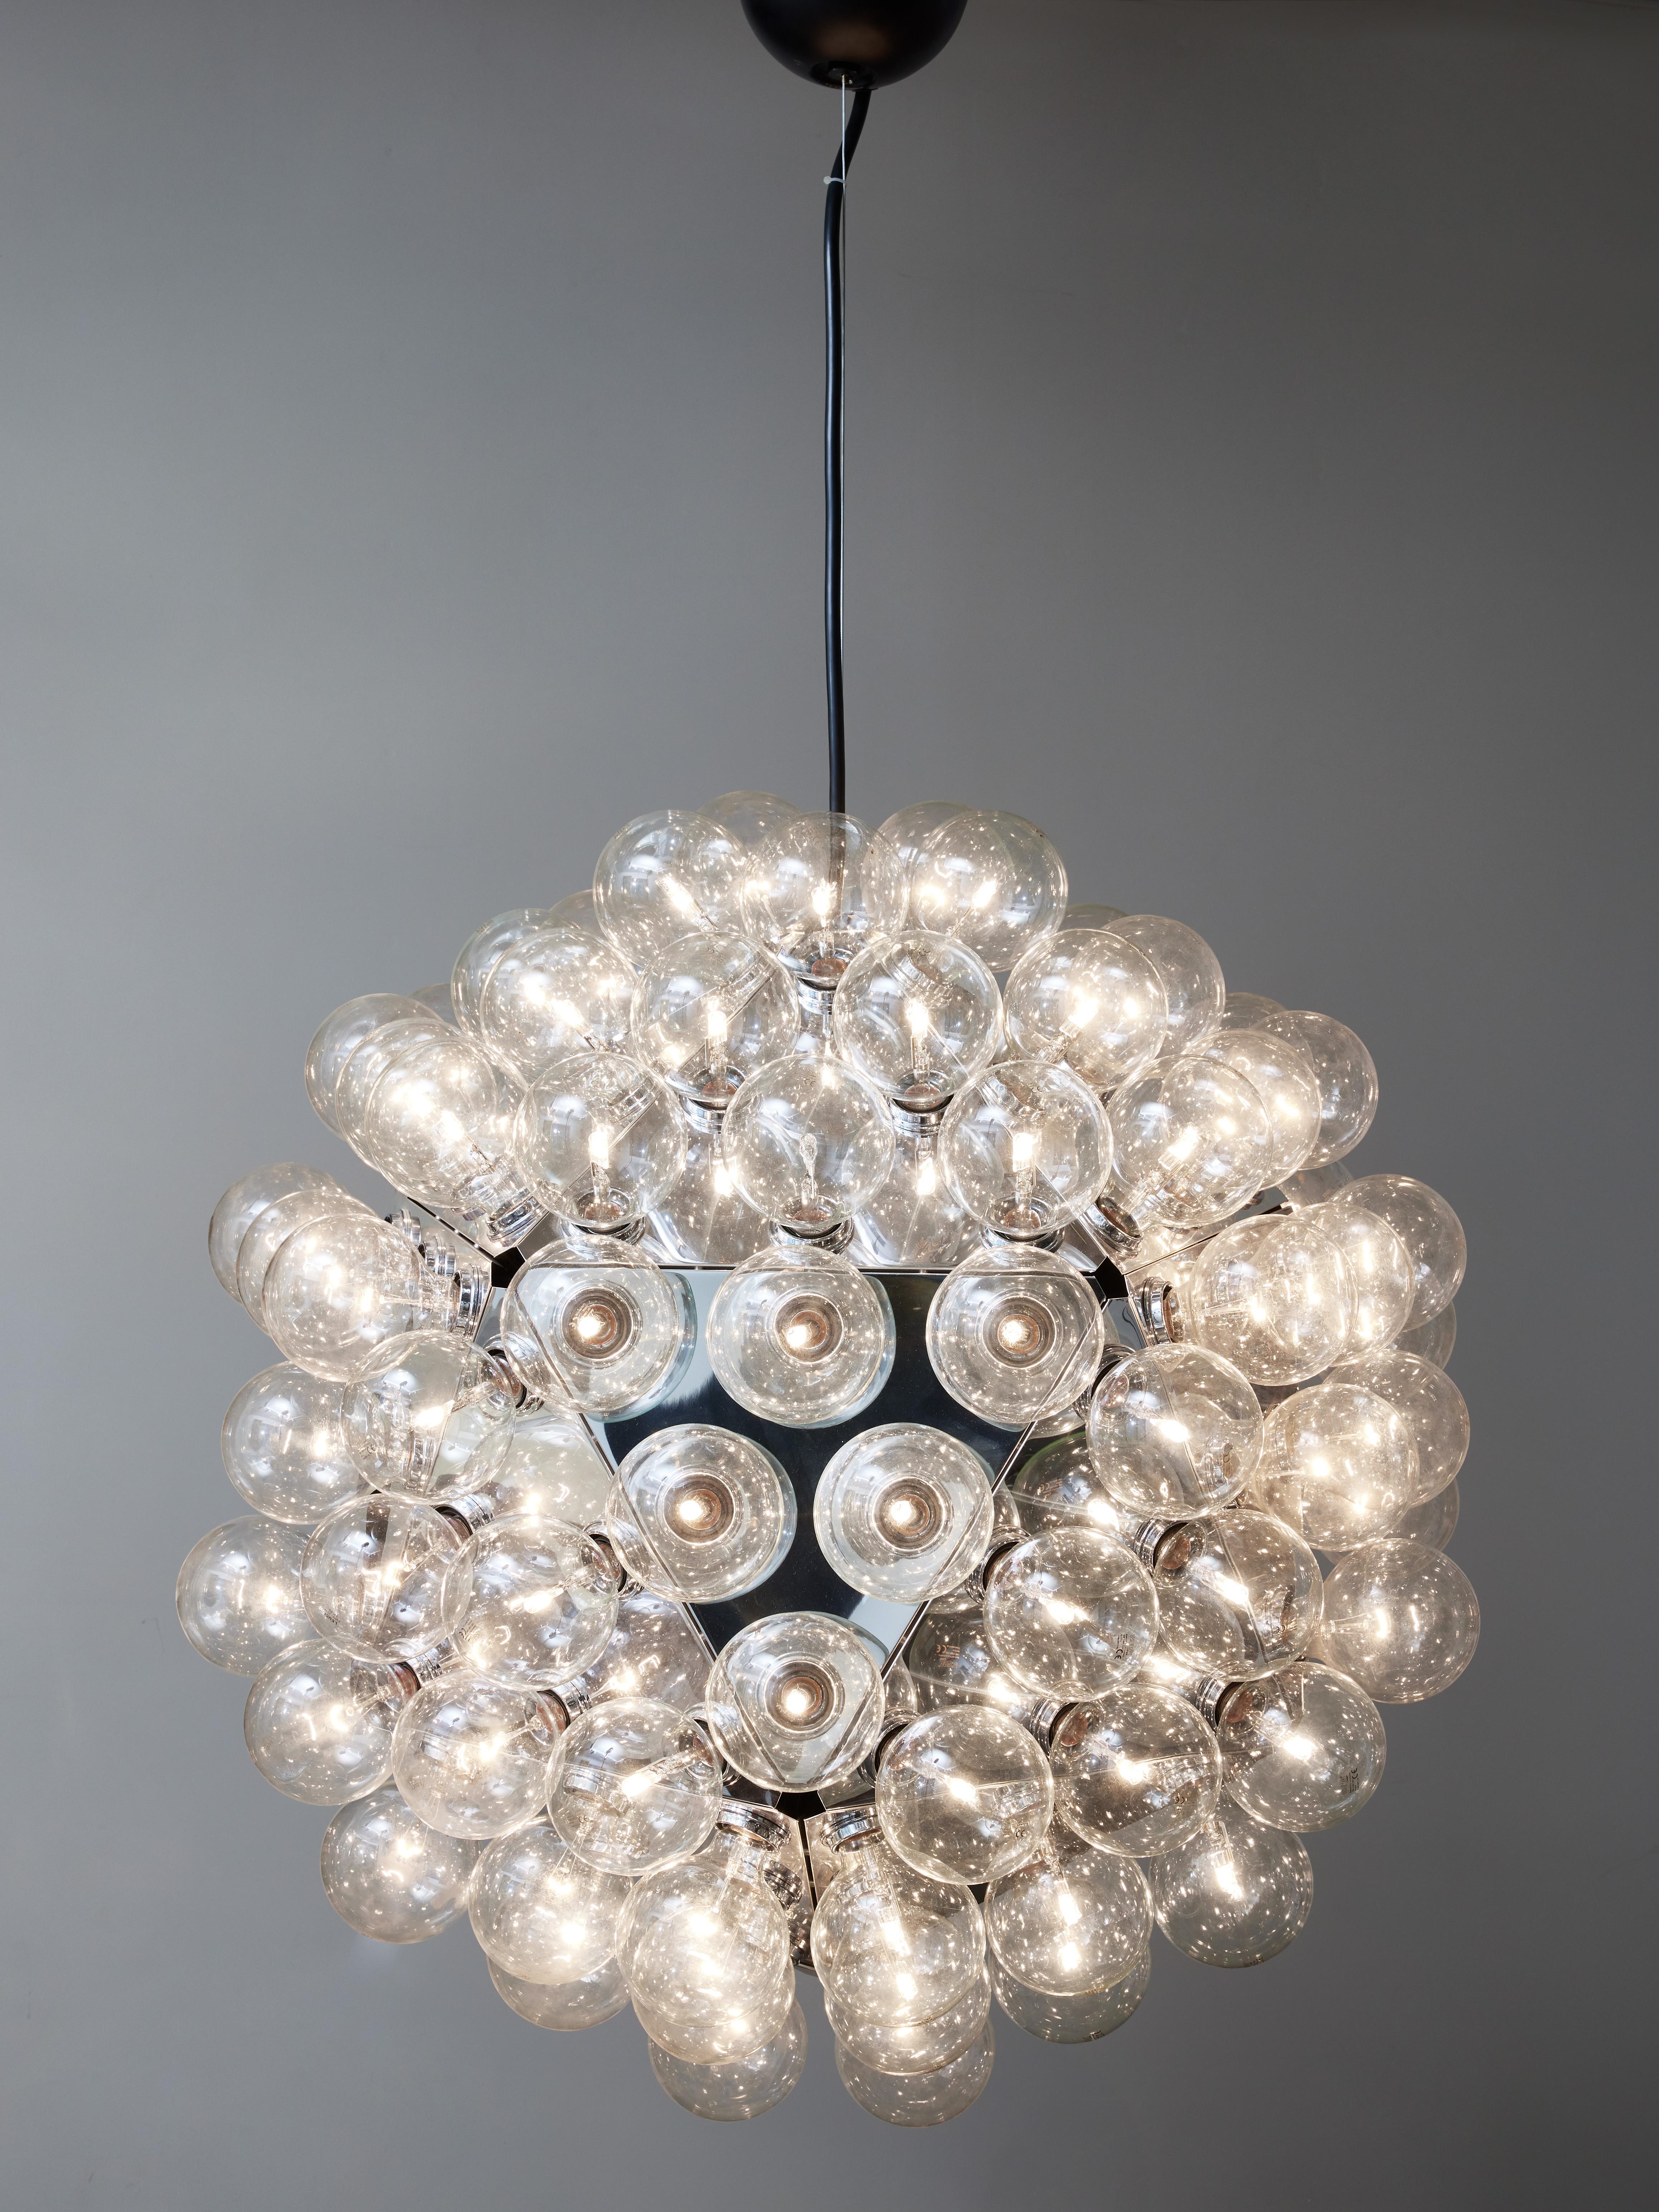 Rarer version of the Taraxacum 88, this is the 120 lights version from the early 2000s of the Classic Achille Castiglioni’s design by Flos. Made of panels of molded aluminum covered with 120 large bulbs, offering a very diffuse light hue.

Achille